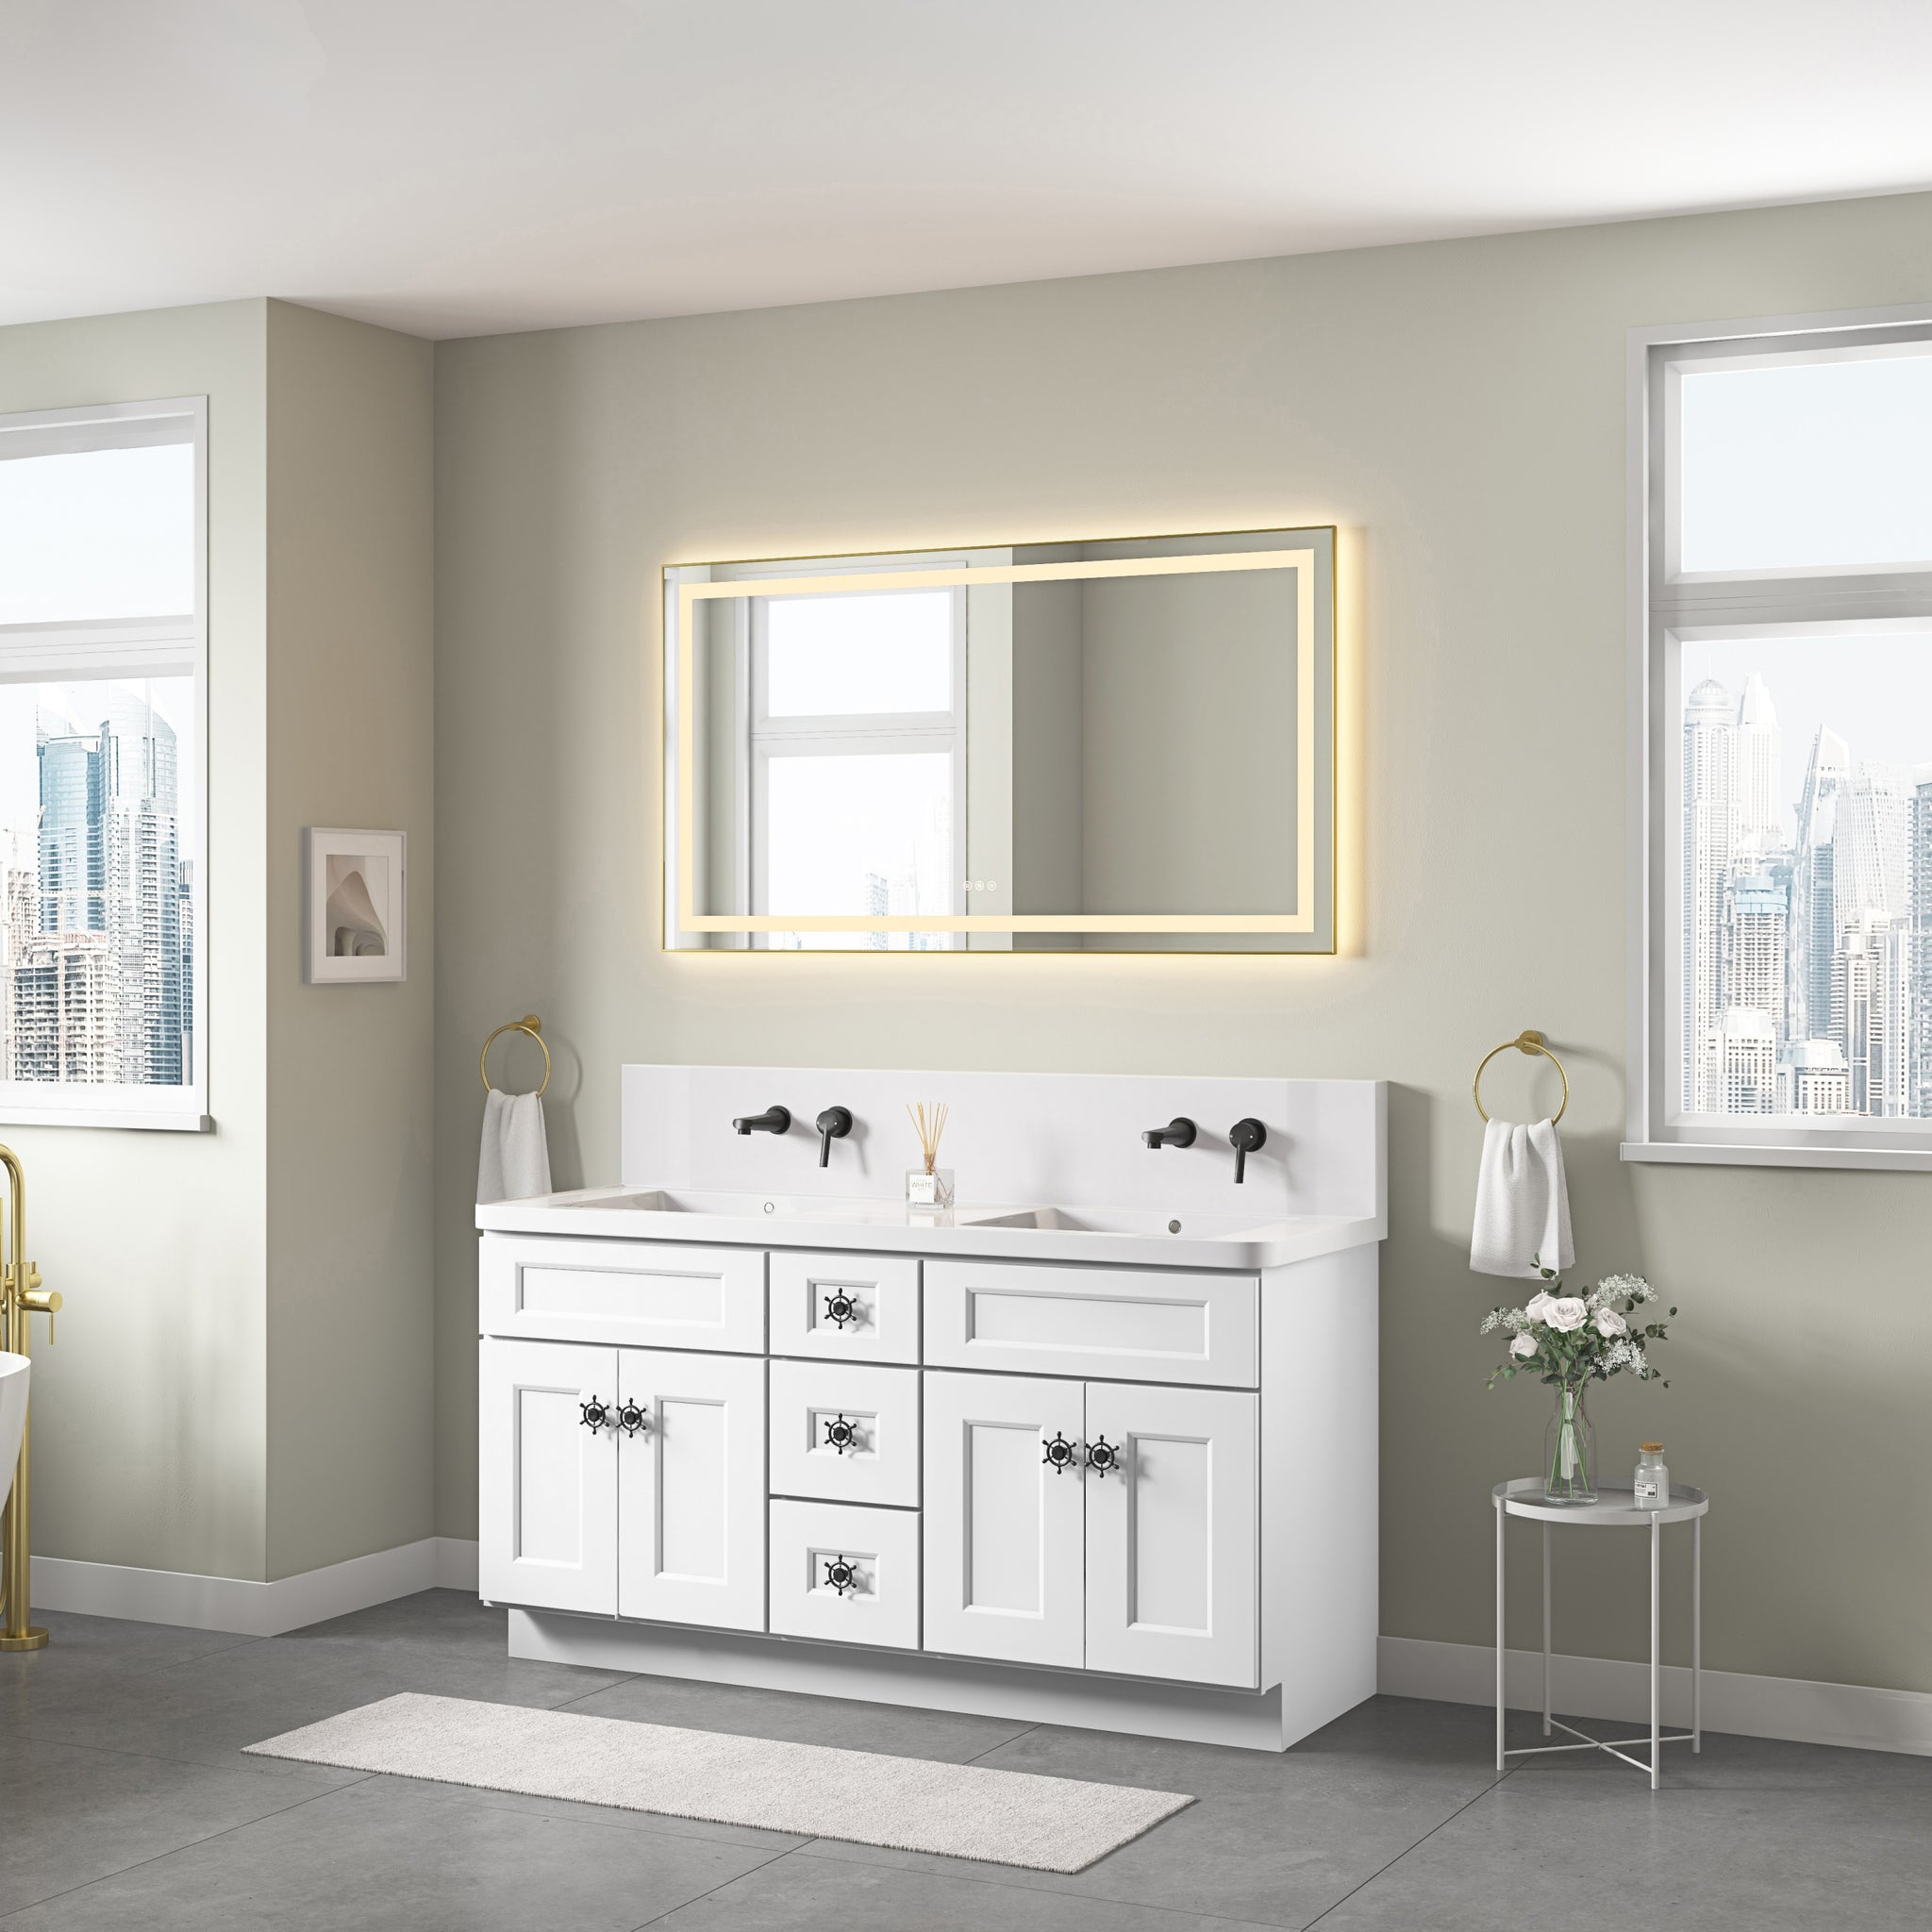 bathroom led mirror is multi functional and each white-ceramic